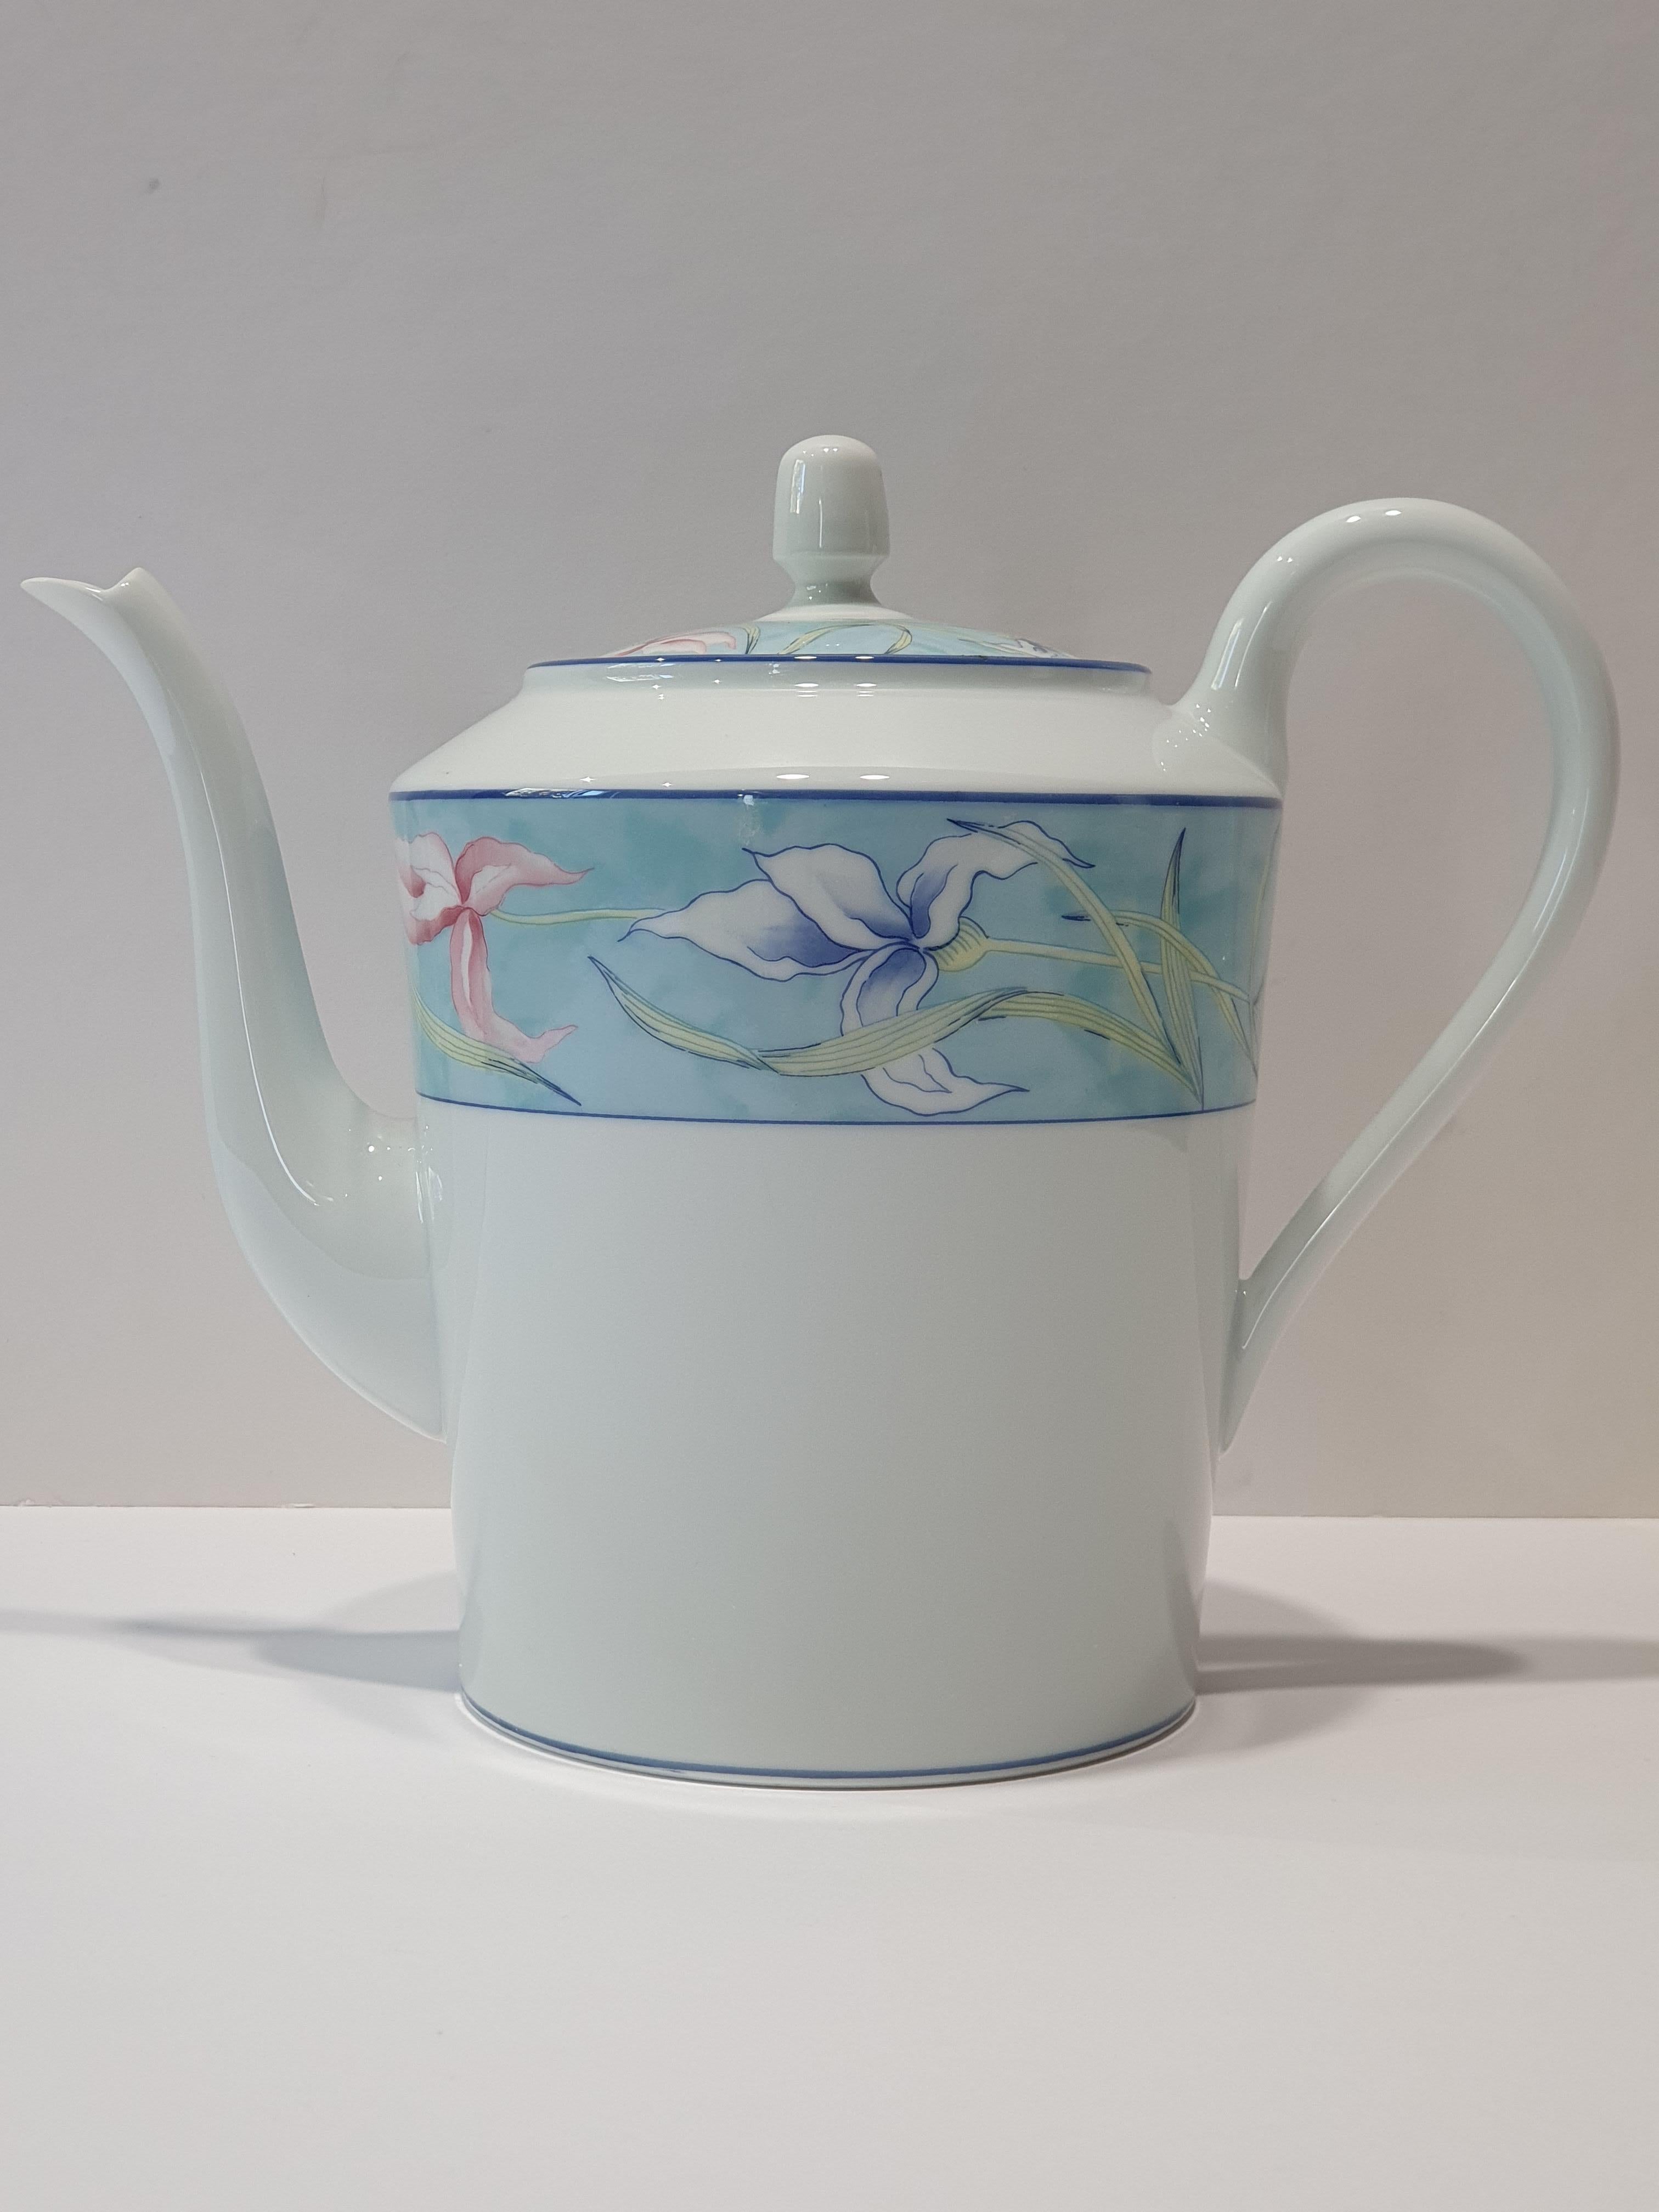 A beautiful coffee service in the finest Limoges porcelain, 